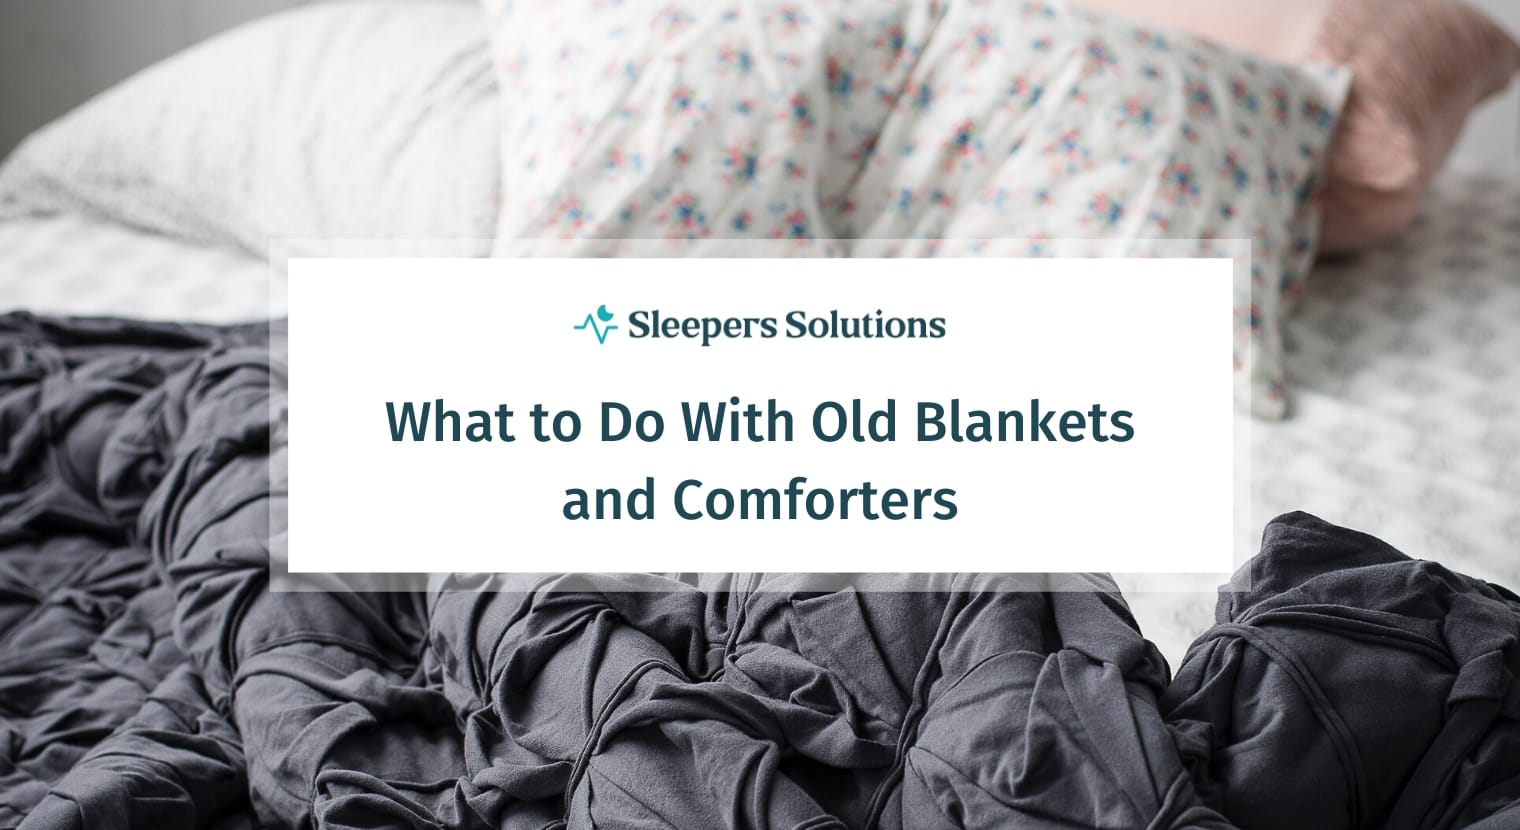 What to Do With Old Blankets and Comforters